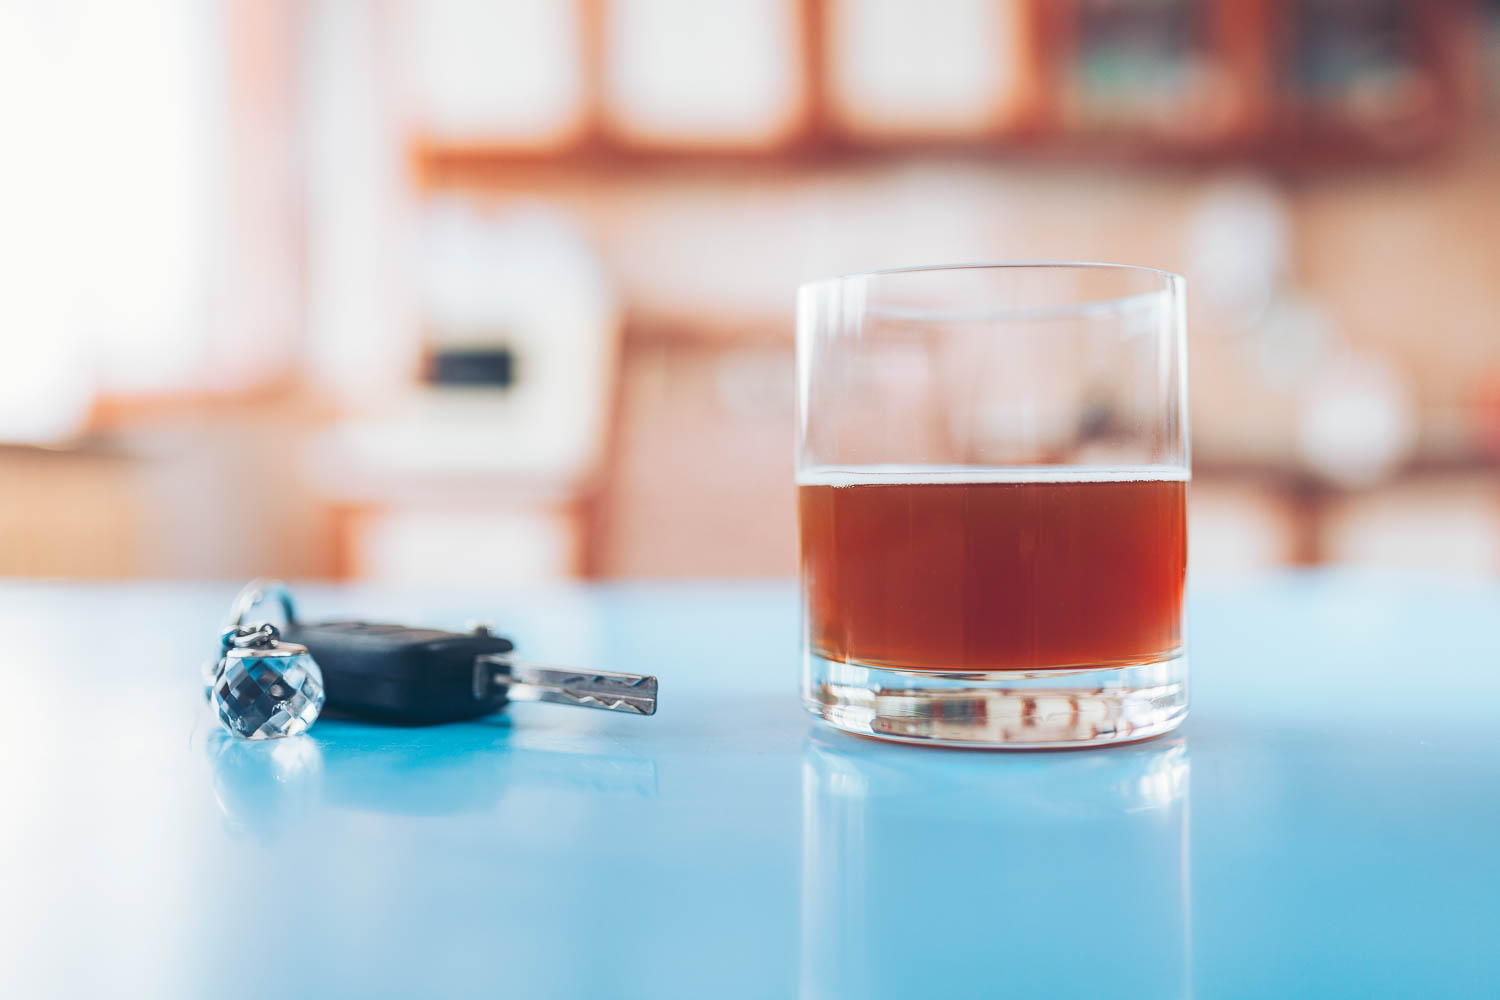 Do you lose your license immediately after a DUI in Florida?: Fort Lauderdale DUI Defense Attorney explains